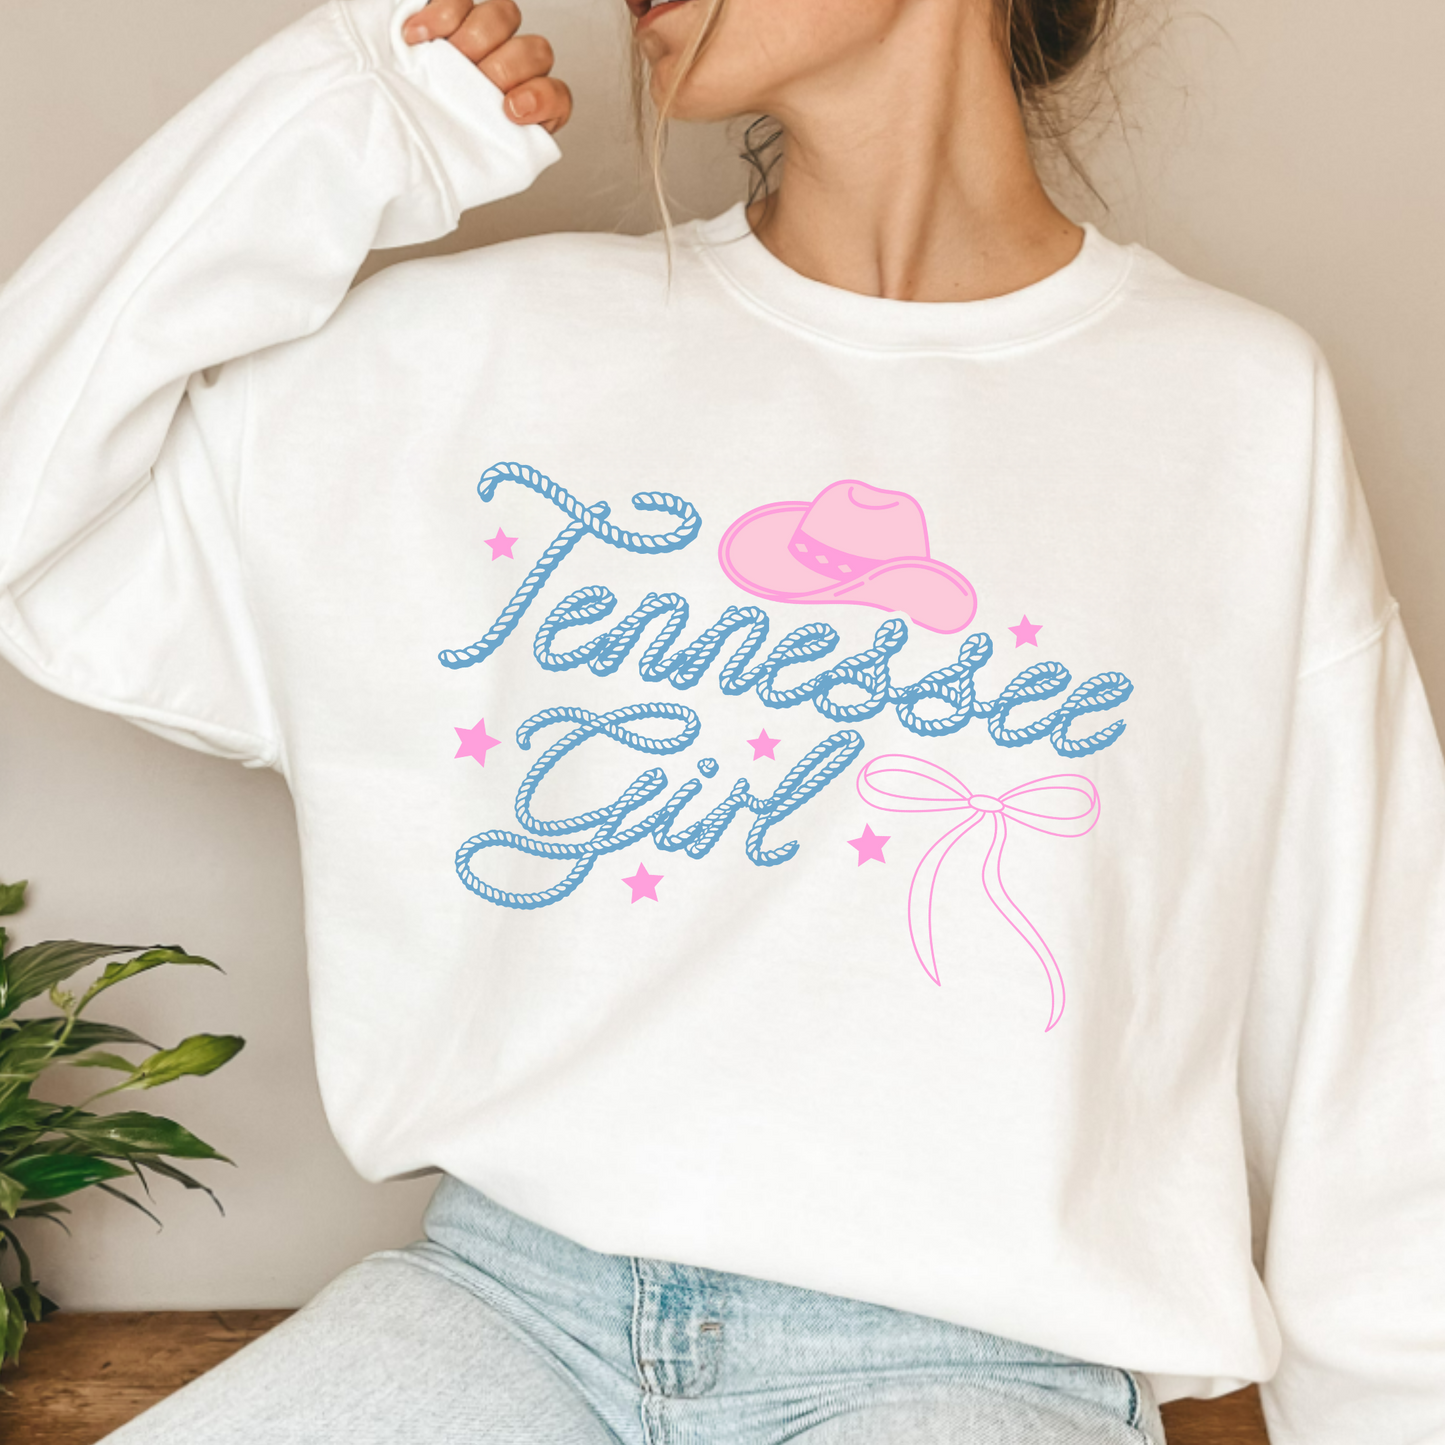 (shirt not included) Tennessee Girl - Clear Film Transfer